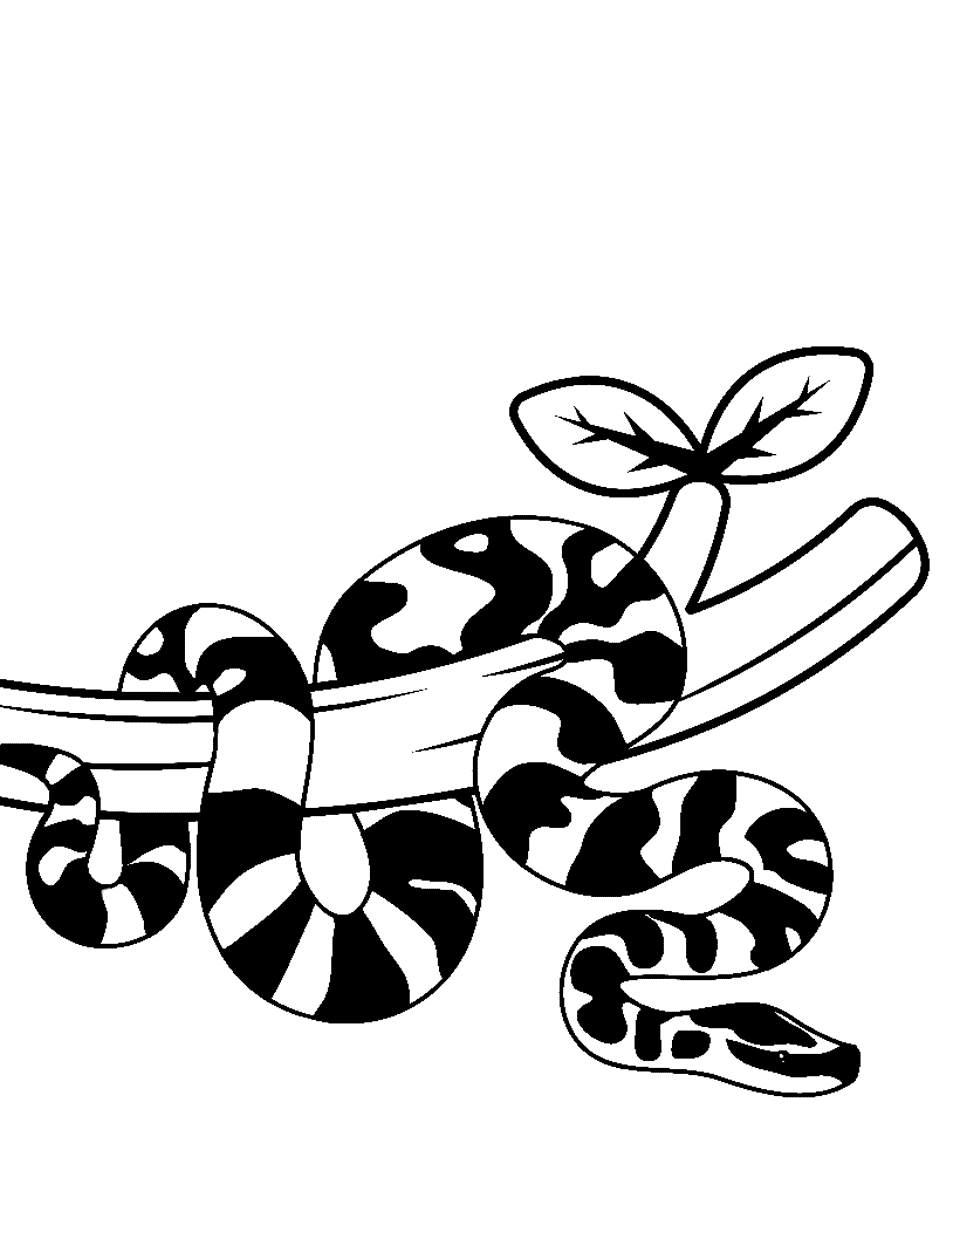 Boa's Strong Grip Coloring Page - A boa constrictor wrapping around a tree branch.